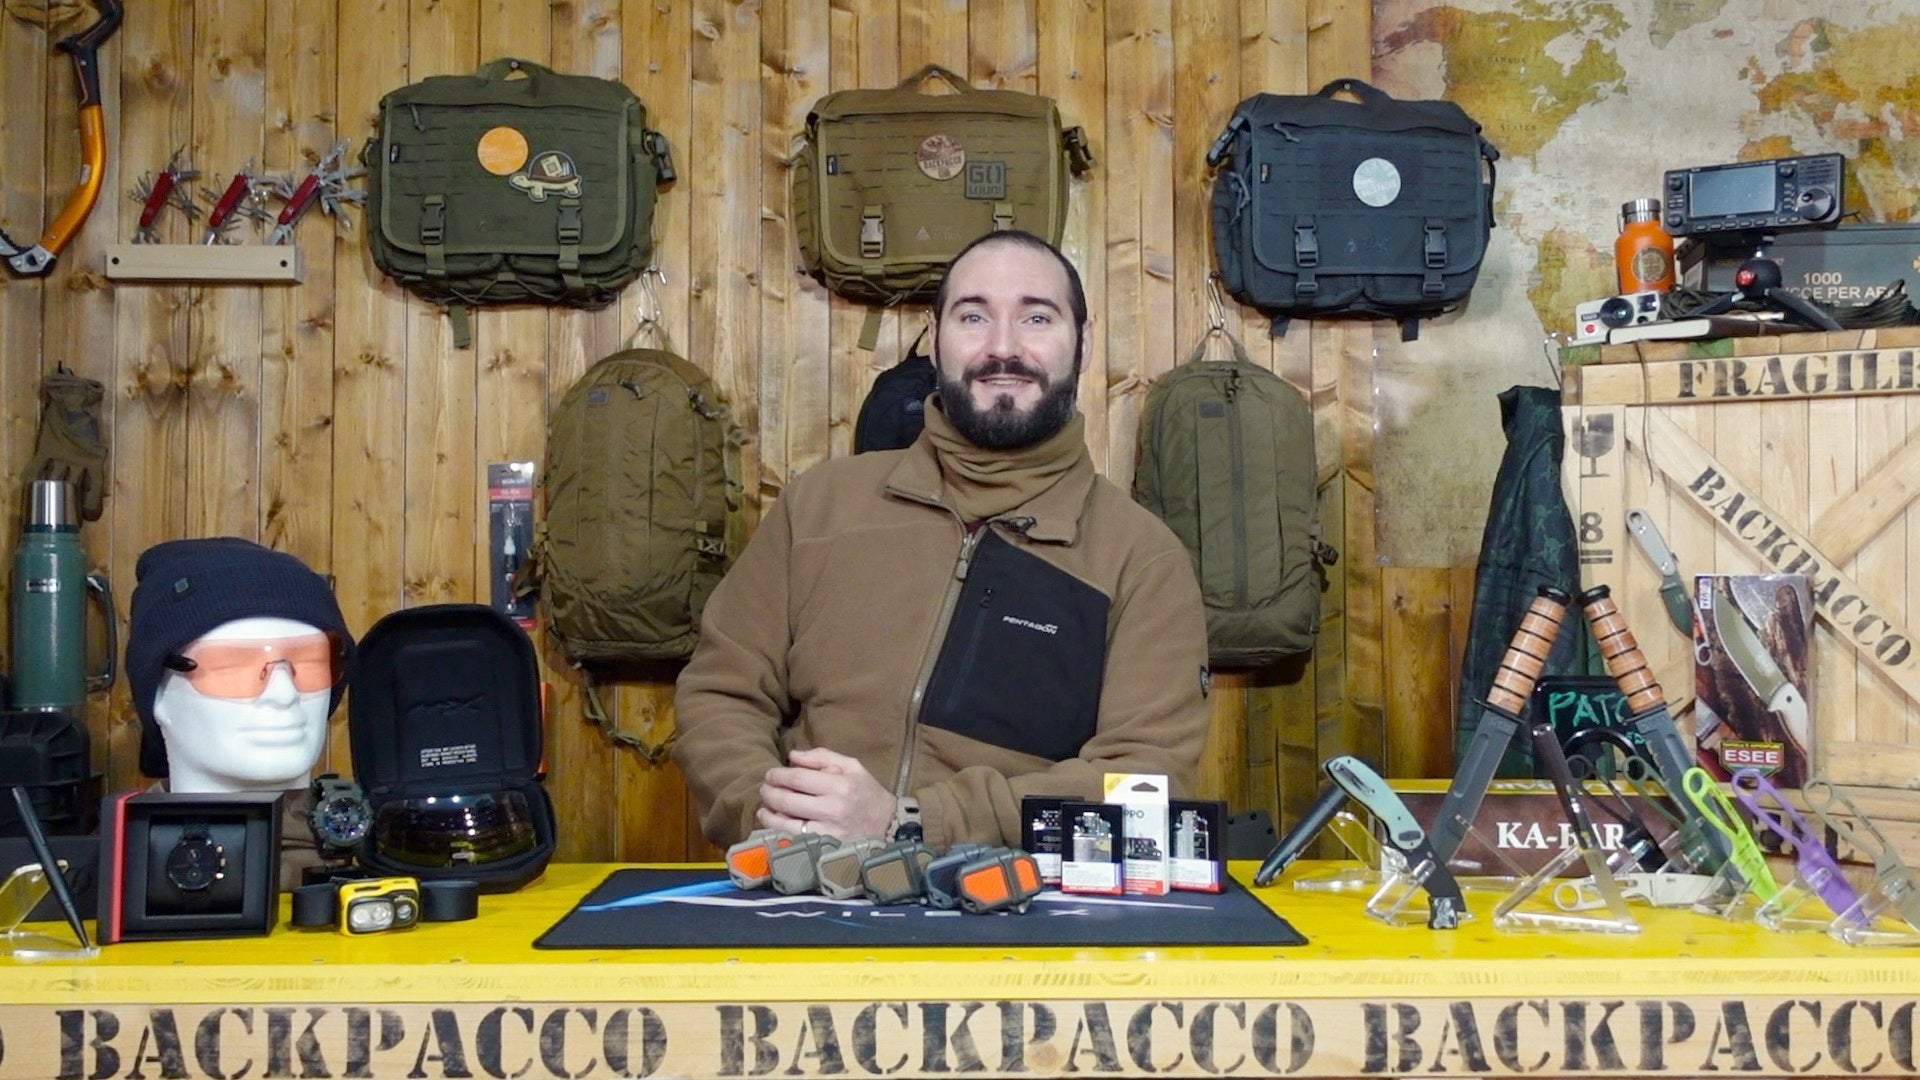 PAOLO DI BACKPACCO SPIEGA IL Thyrm PyroVault 2.0